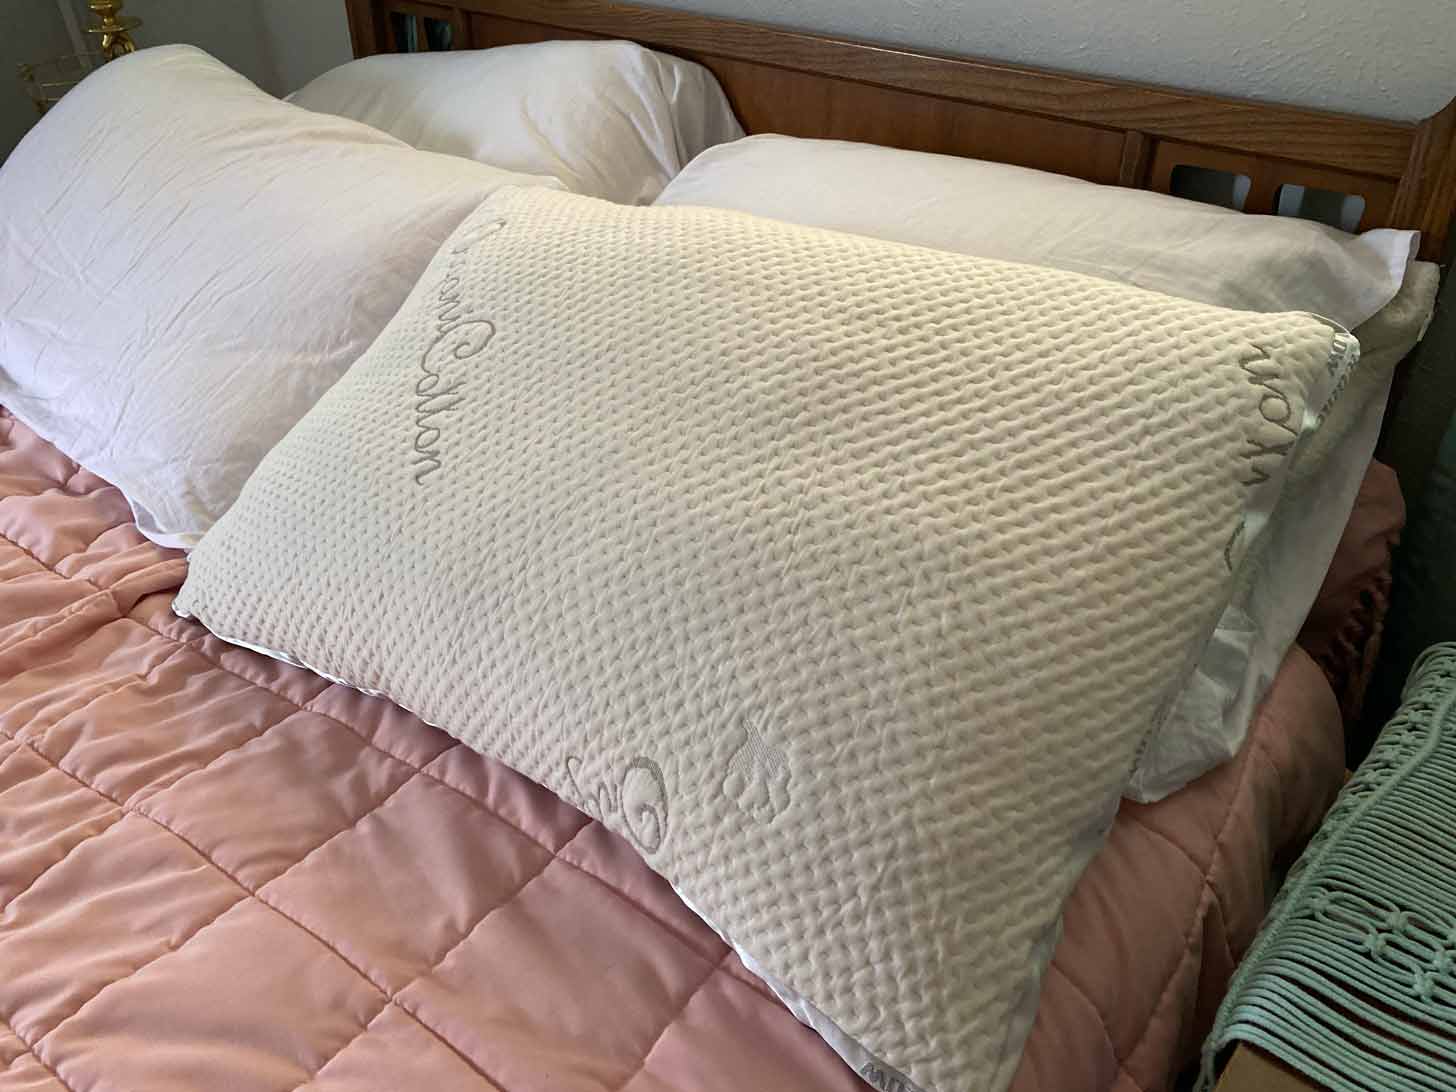 A Nest Bedding pillow on a bed